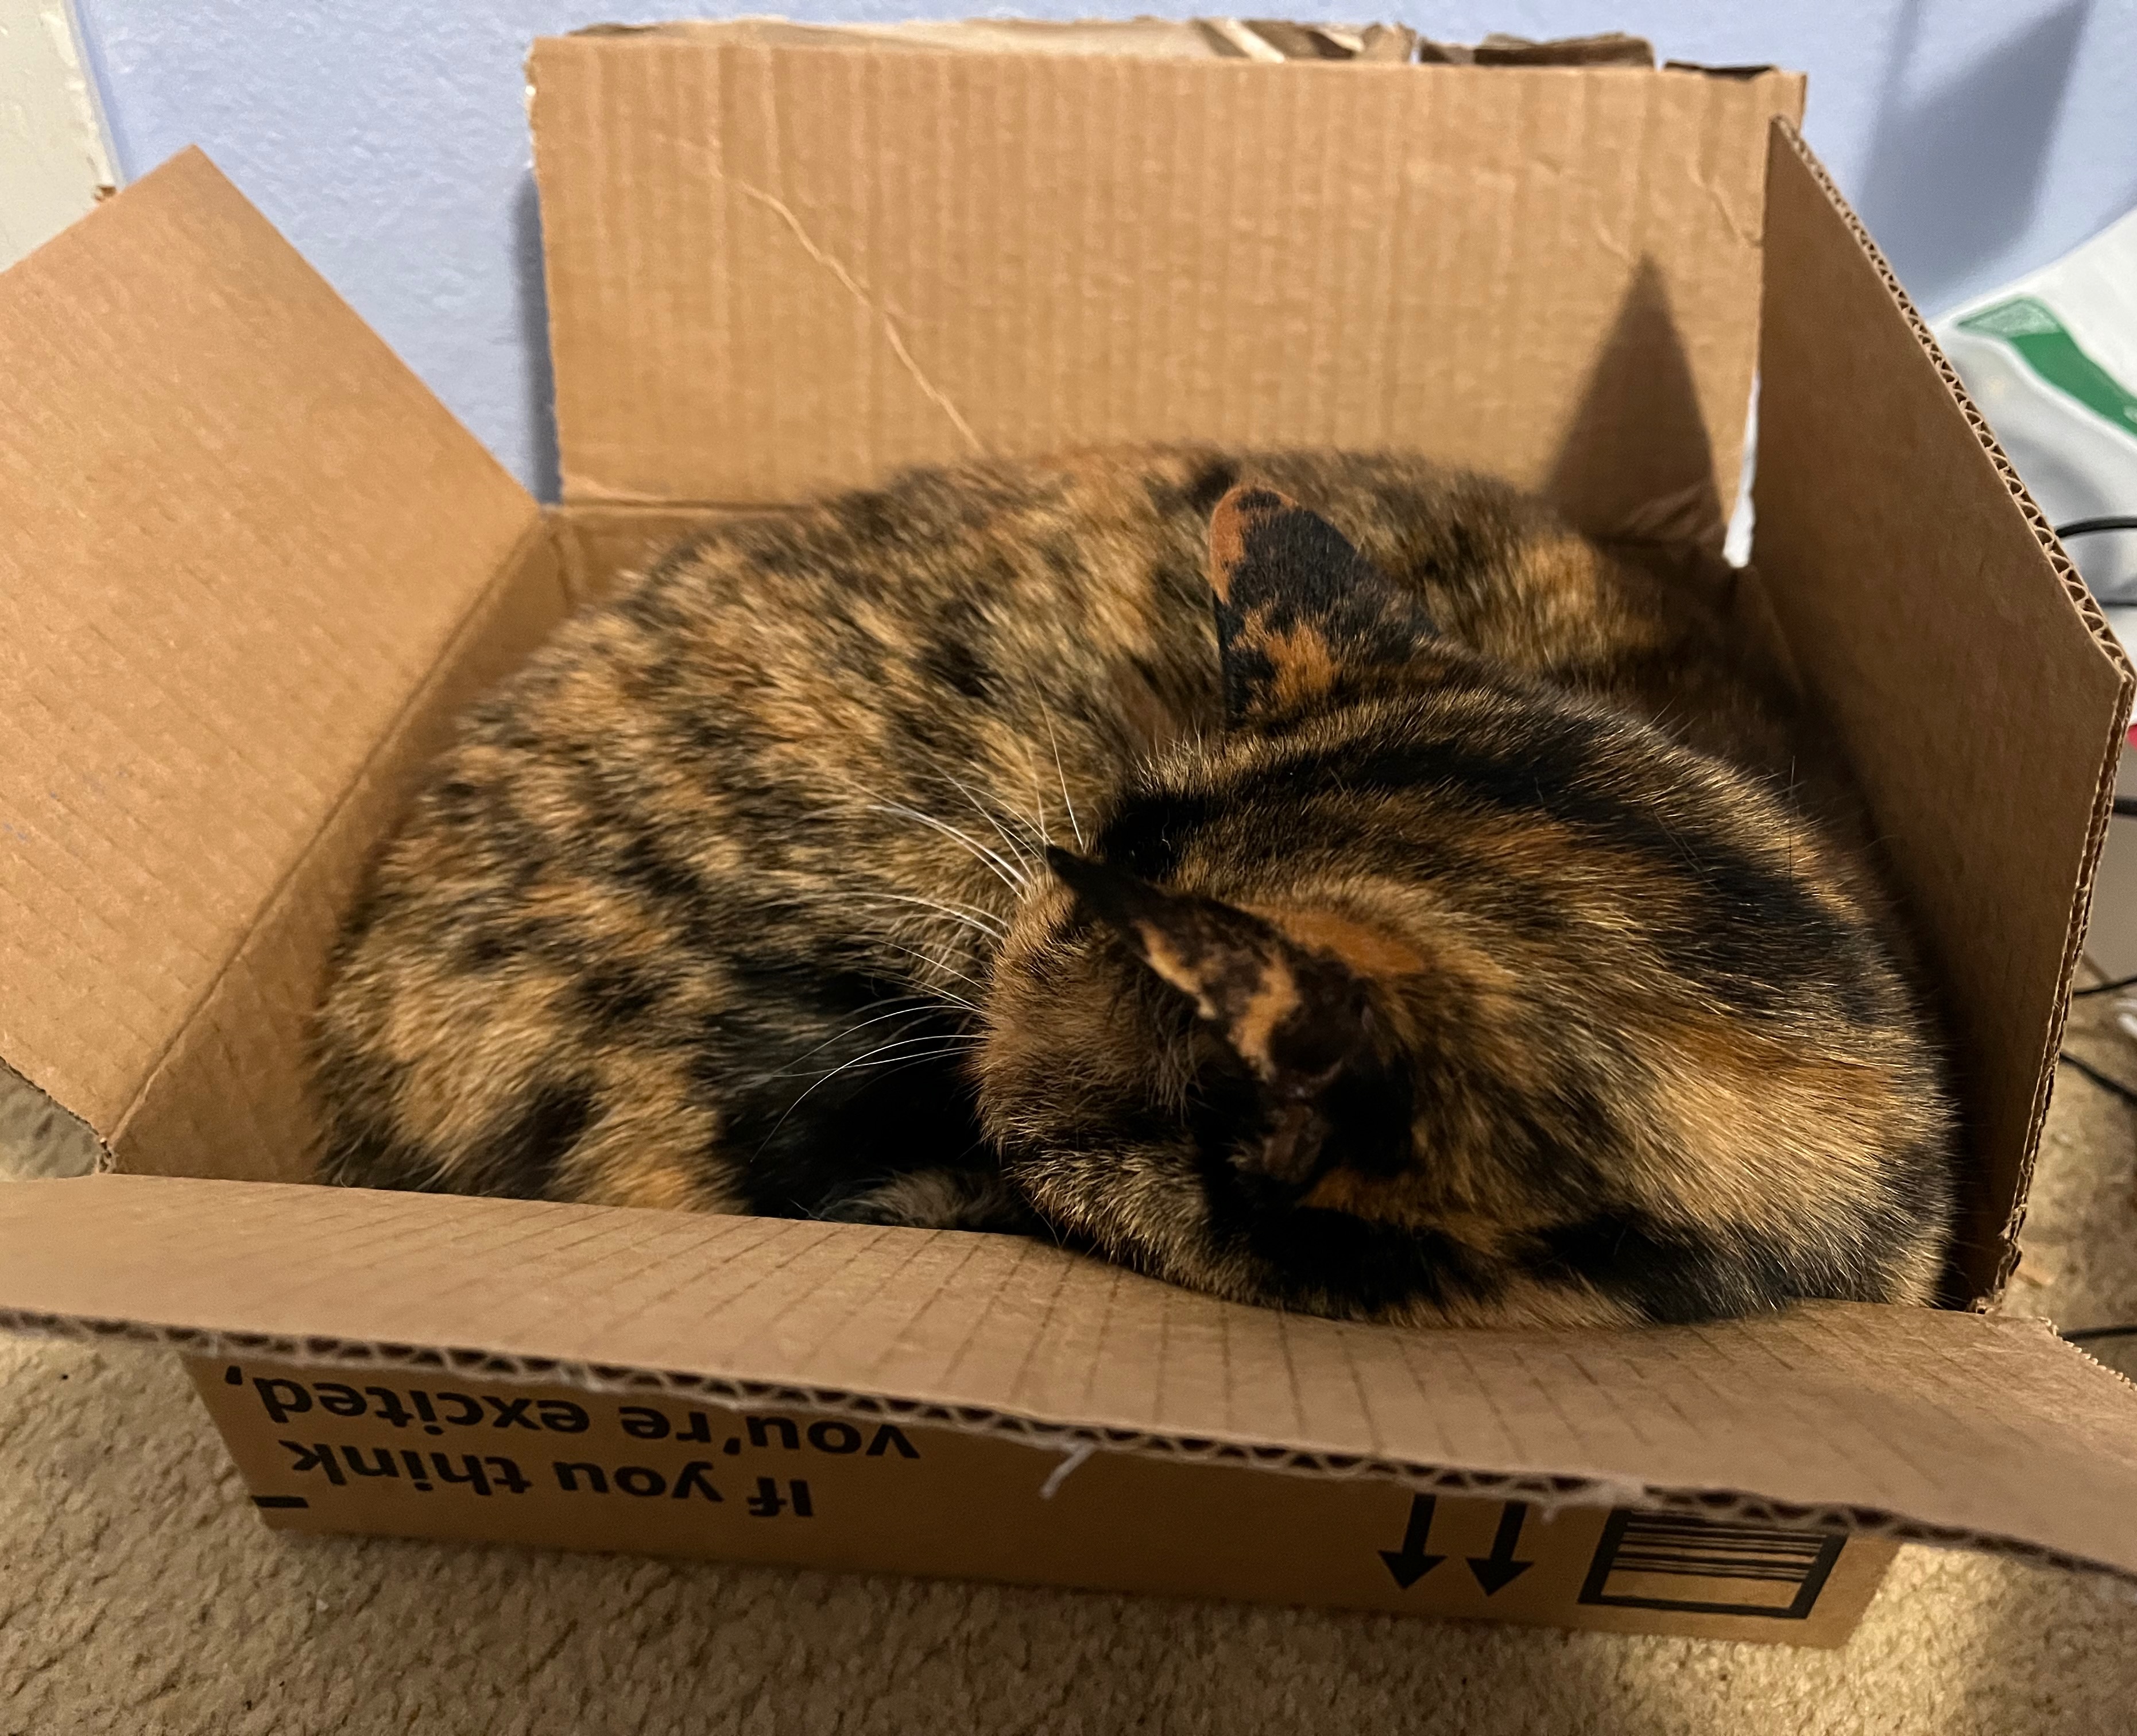 Picture of my cat sleeping in a box barely large enough for them. Their head is resting on one edge of the box.